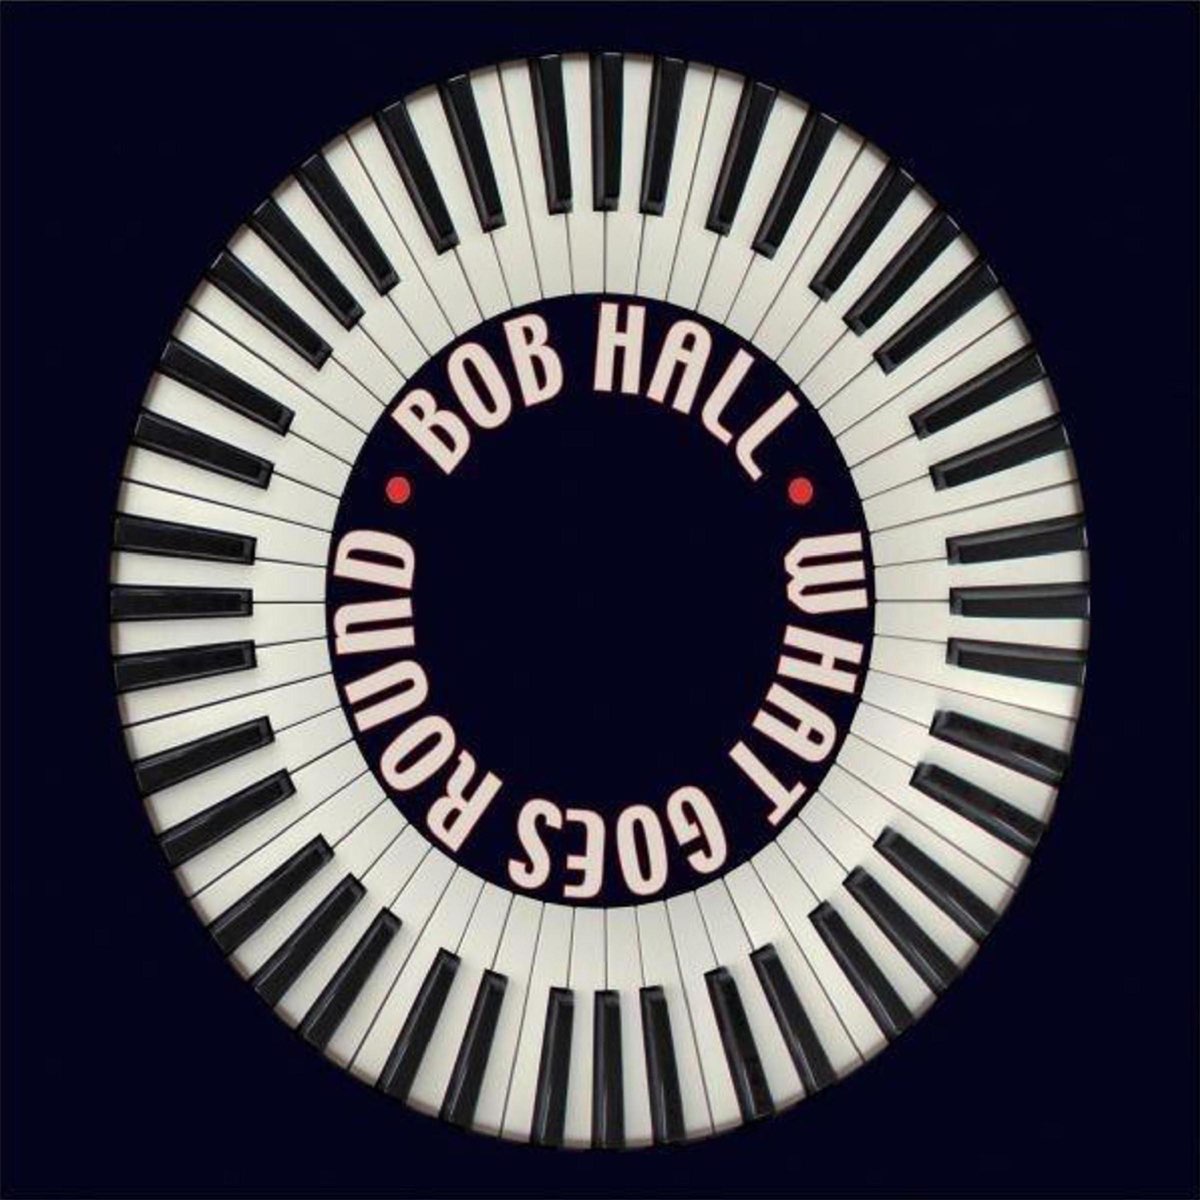 Bob Hall - Running with the Blues. Dag Finn - what goes around (comes around). Come Round. Tuff - 2012 - what goes around comes around again. Come round to us